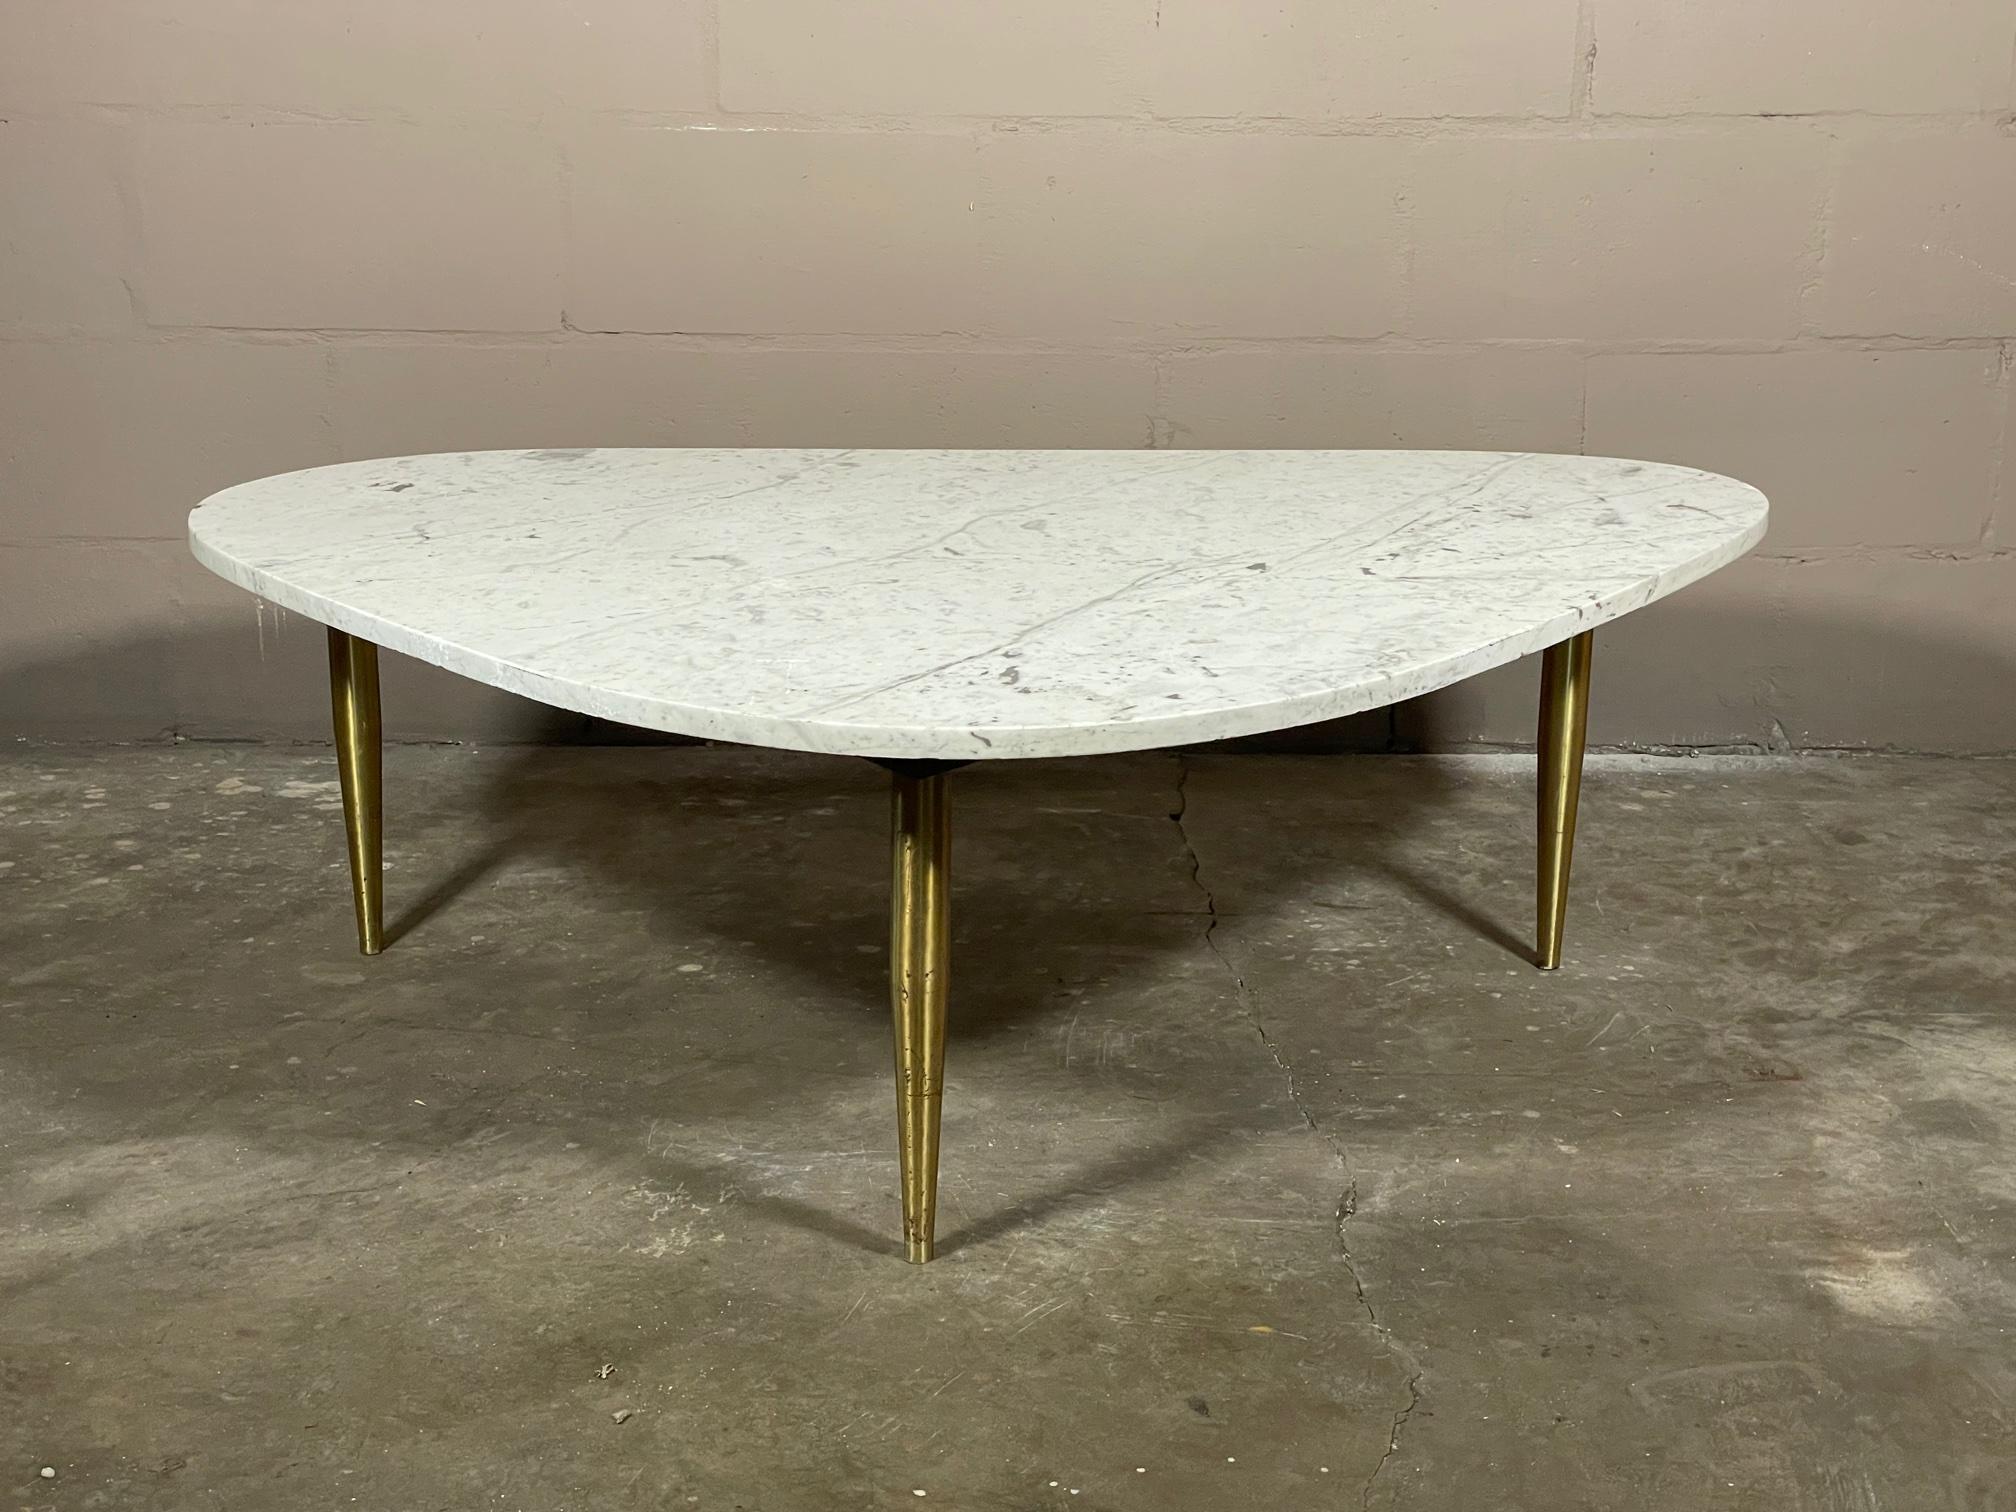 An unusual Italian table with brass legs, Carrara white marble top with an interesting-triangular, biomorphic shape.